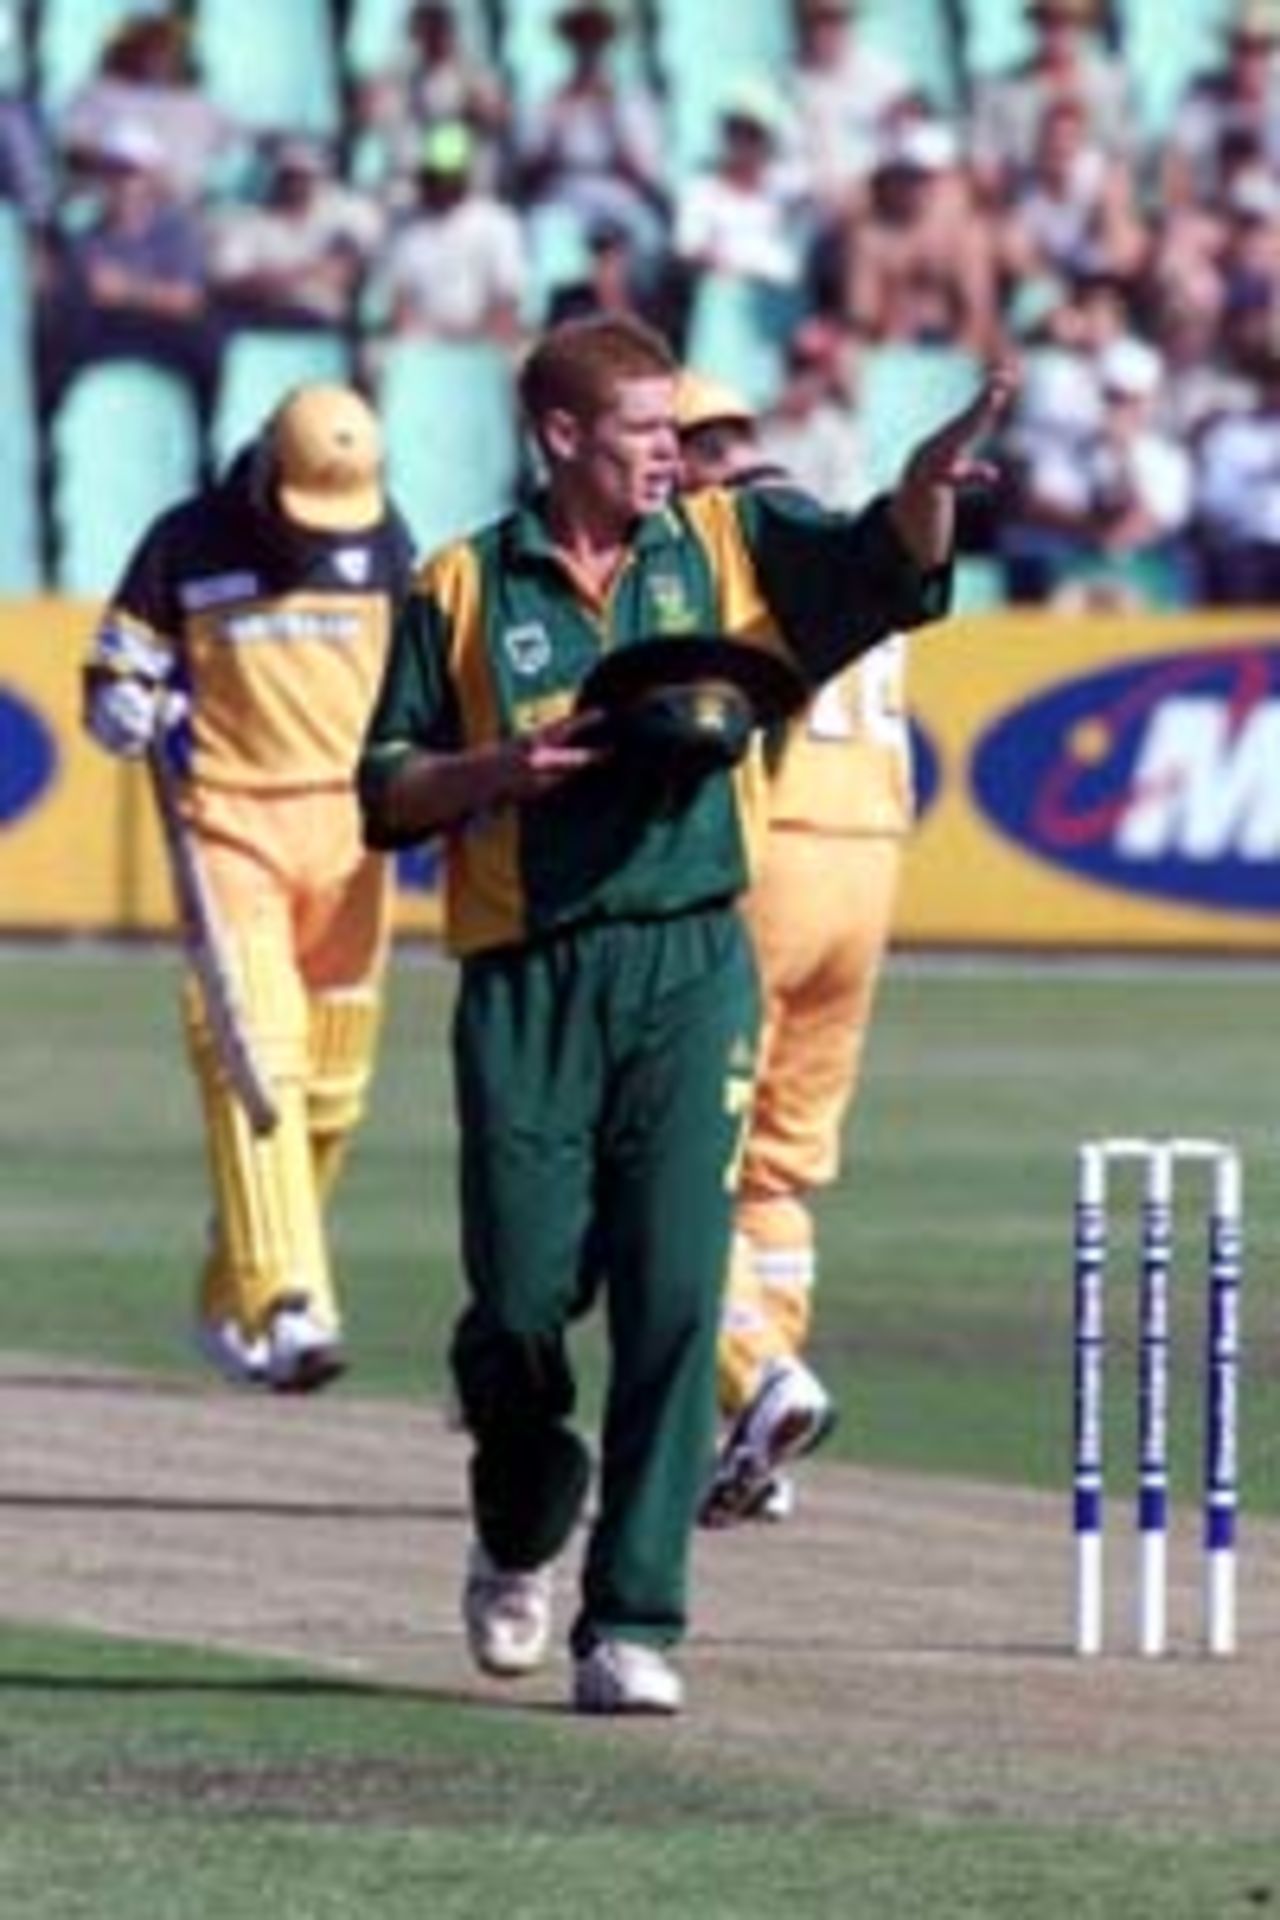 12 Apr 2000: Shaun Pollock of South Africa, captaining the side following the sacking of Hansie Cronje, adjusts his field during the first game of the One Day International Series between South Africa and Australia at Kingsmead, Durban, South Africa.